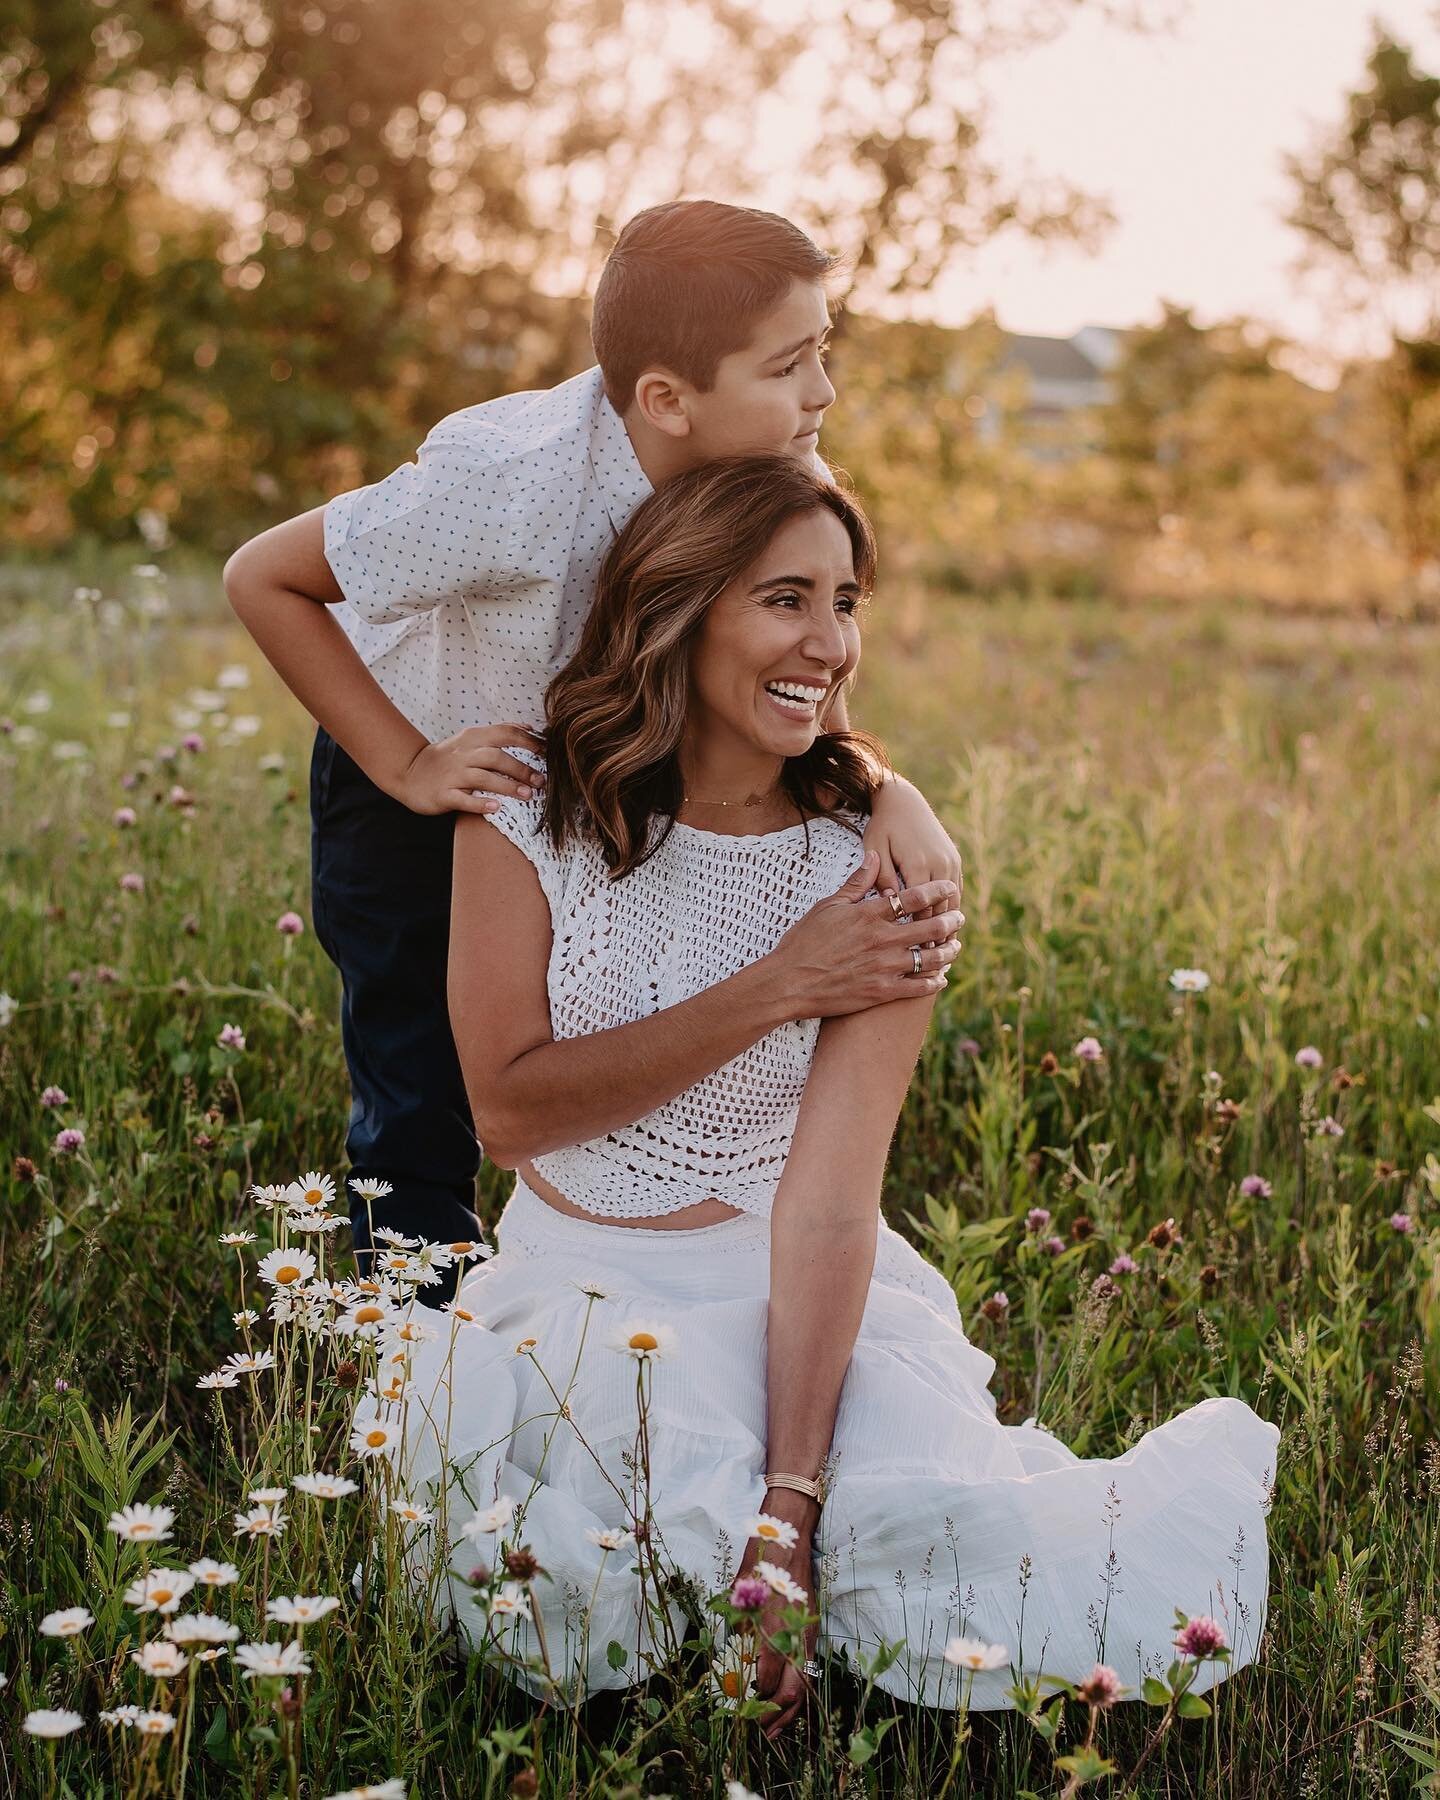 Melts my ❤️ #motherslove #mommyandsongoals #love #sunkissed #bohovibes #unconditionallove❤️ #family #beauty #nwi #crownpoint #authenticlovemag #wildheartsandsillylaughs #chcphotographyinc #spontaneous #dramatic #editorial #beautifullight #wildflowers